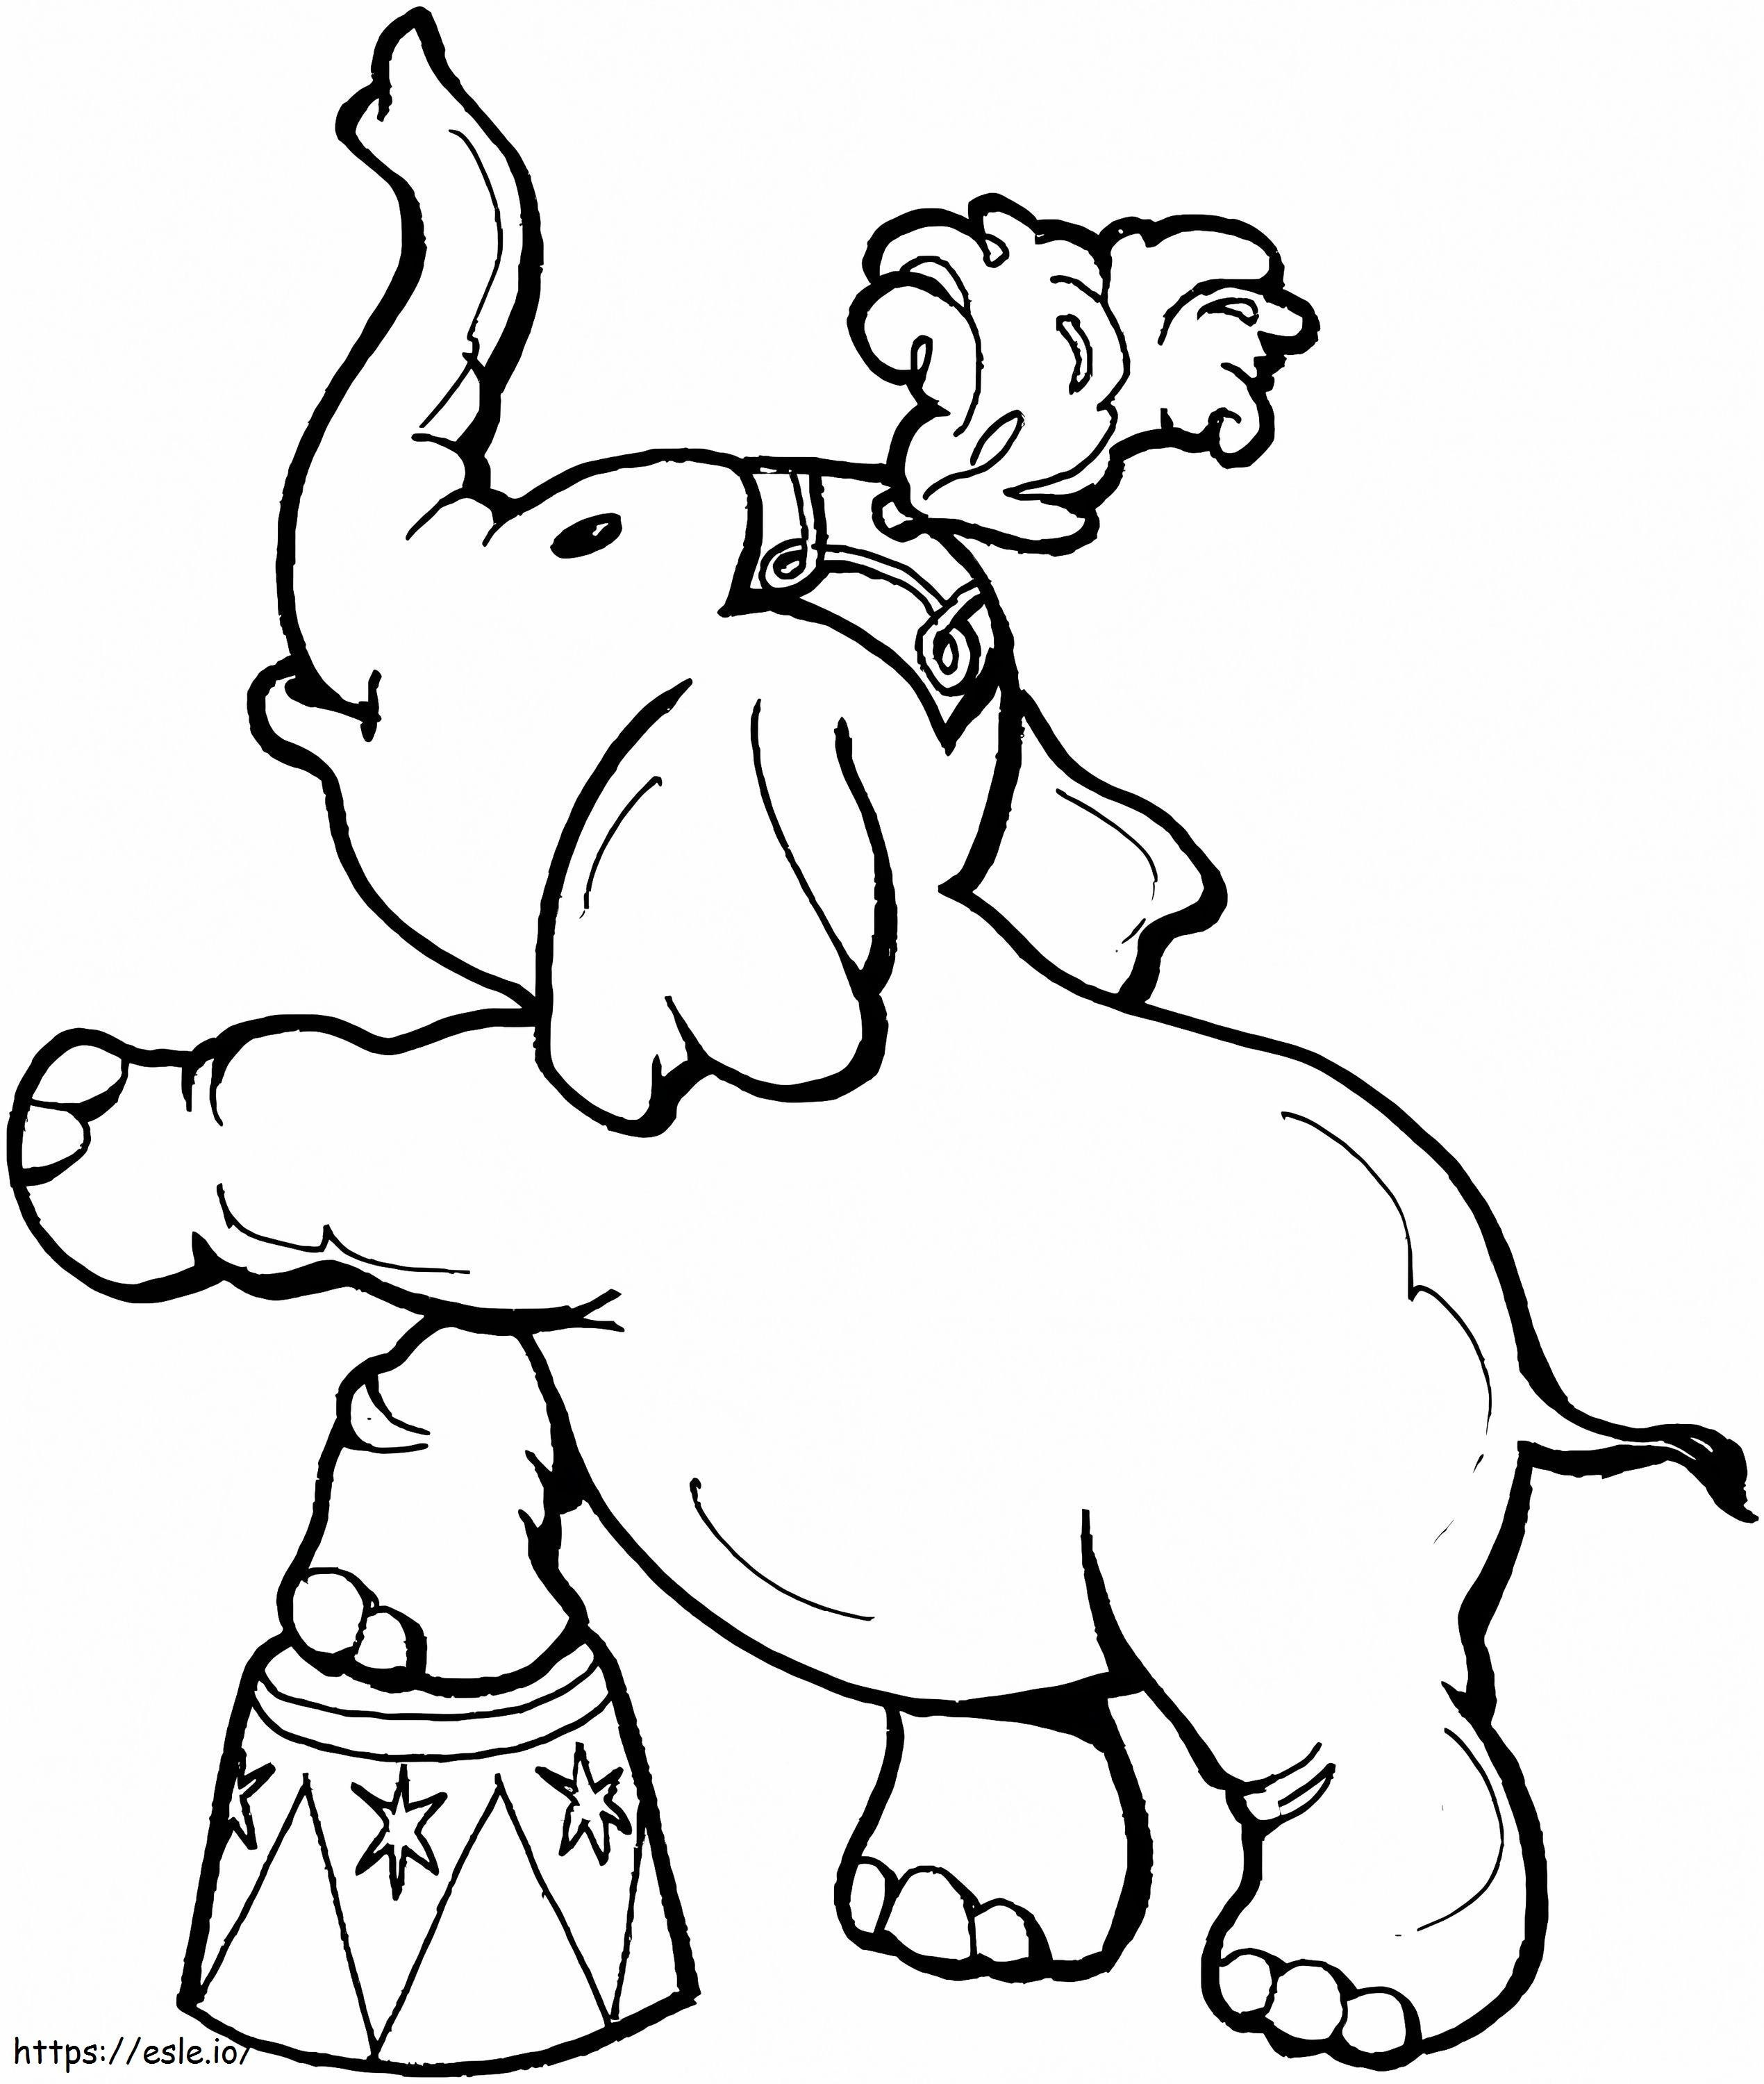 Baby Elephant In A Zoo coloring page